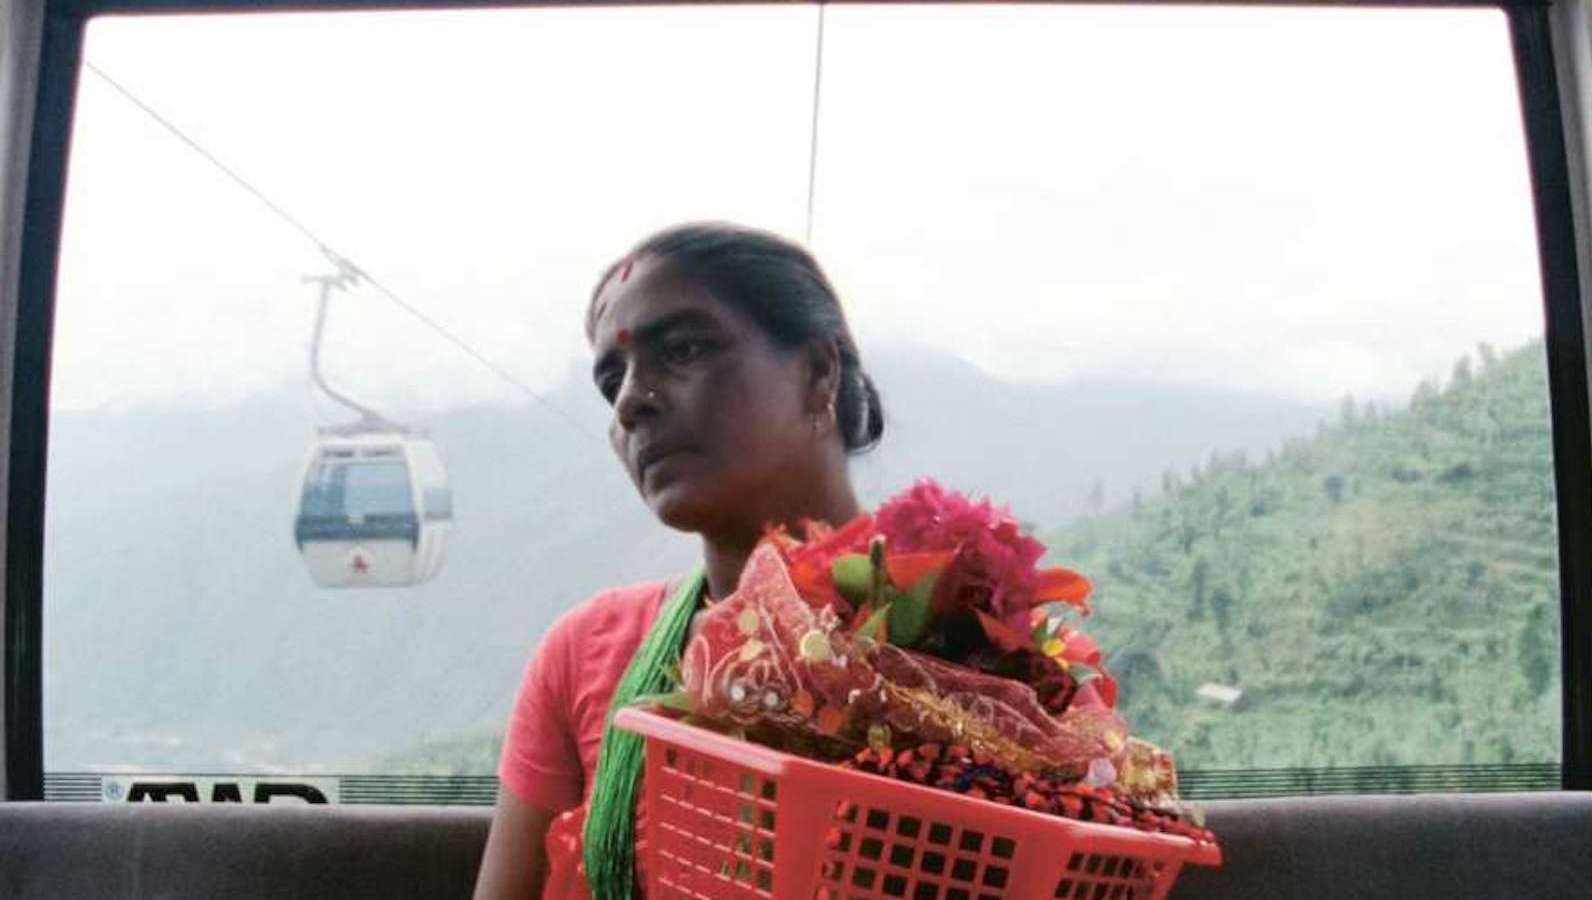 A woman carries a red basket full of flowers in a gondola high in the mountains